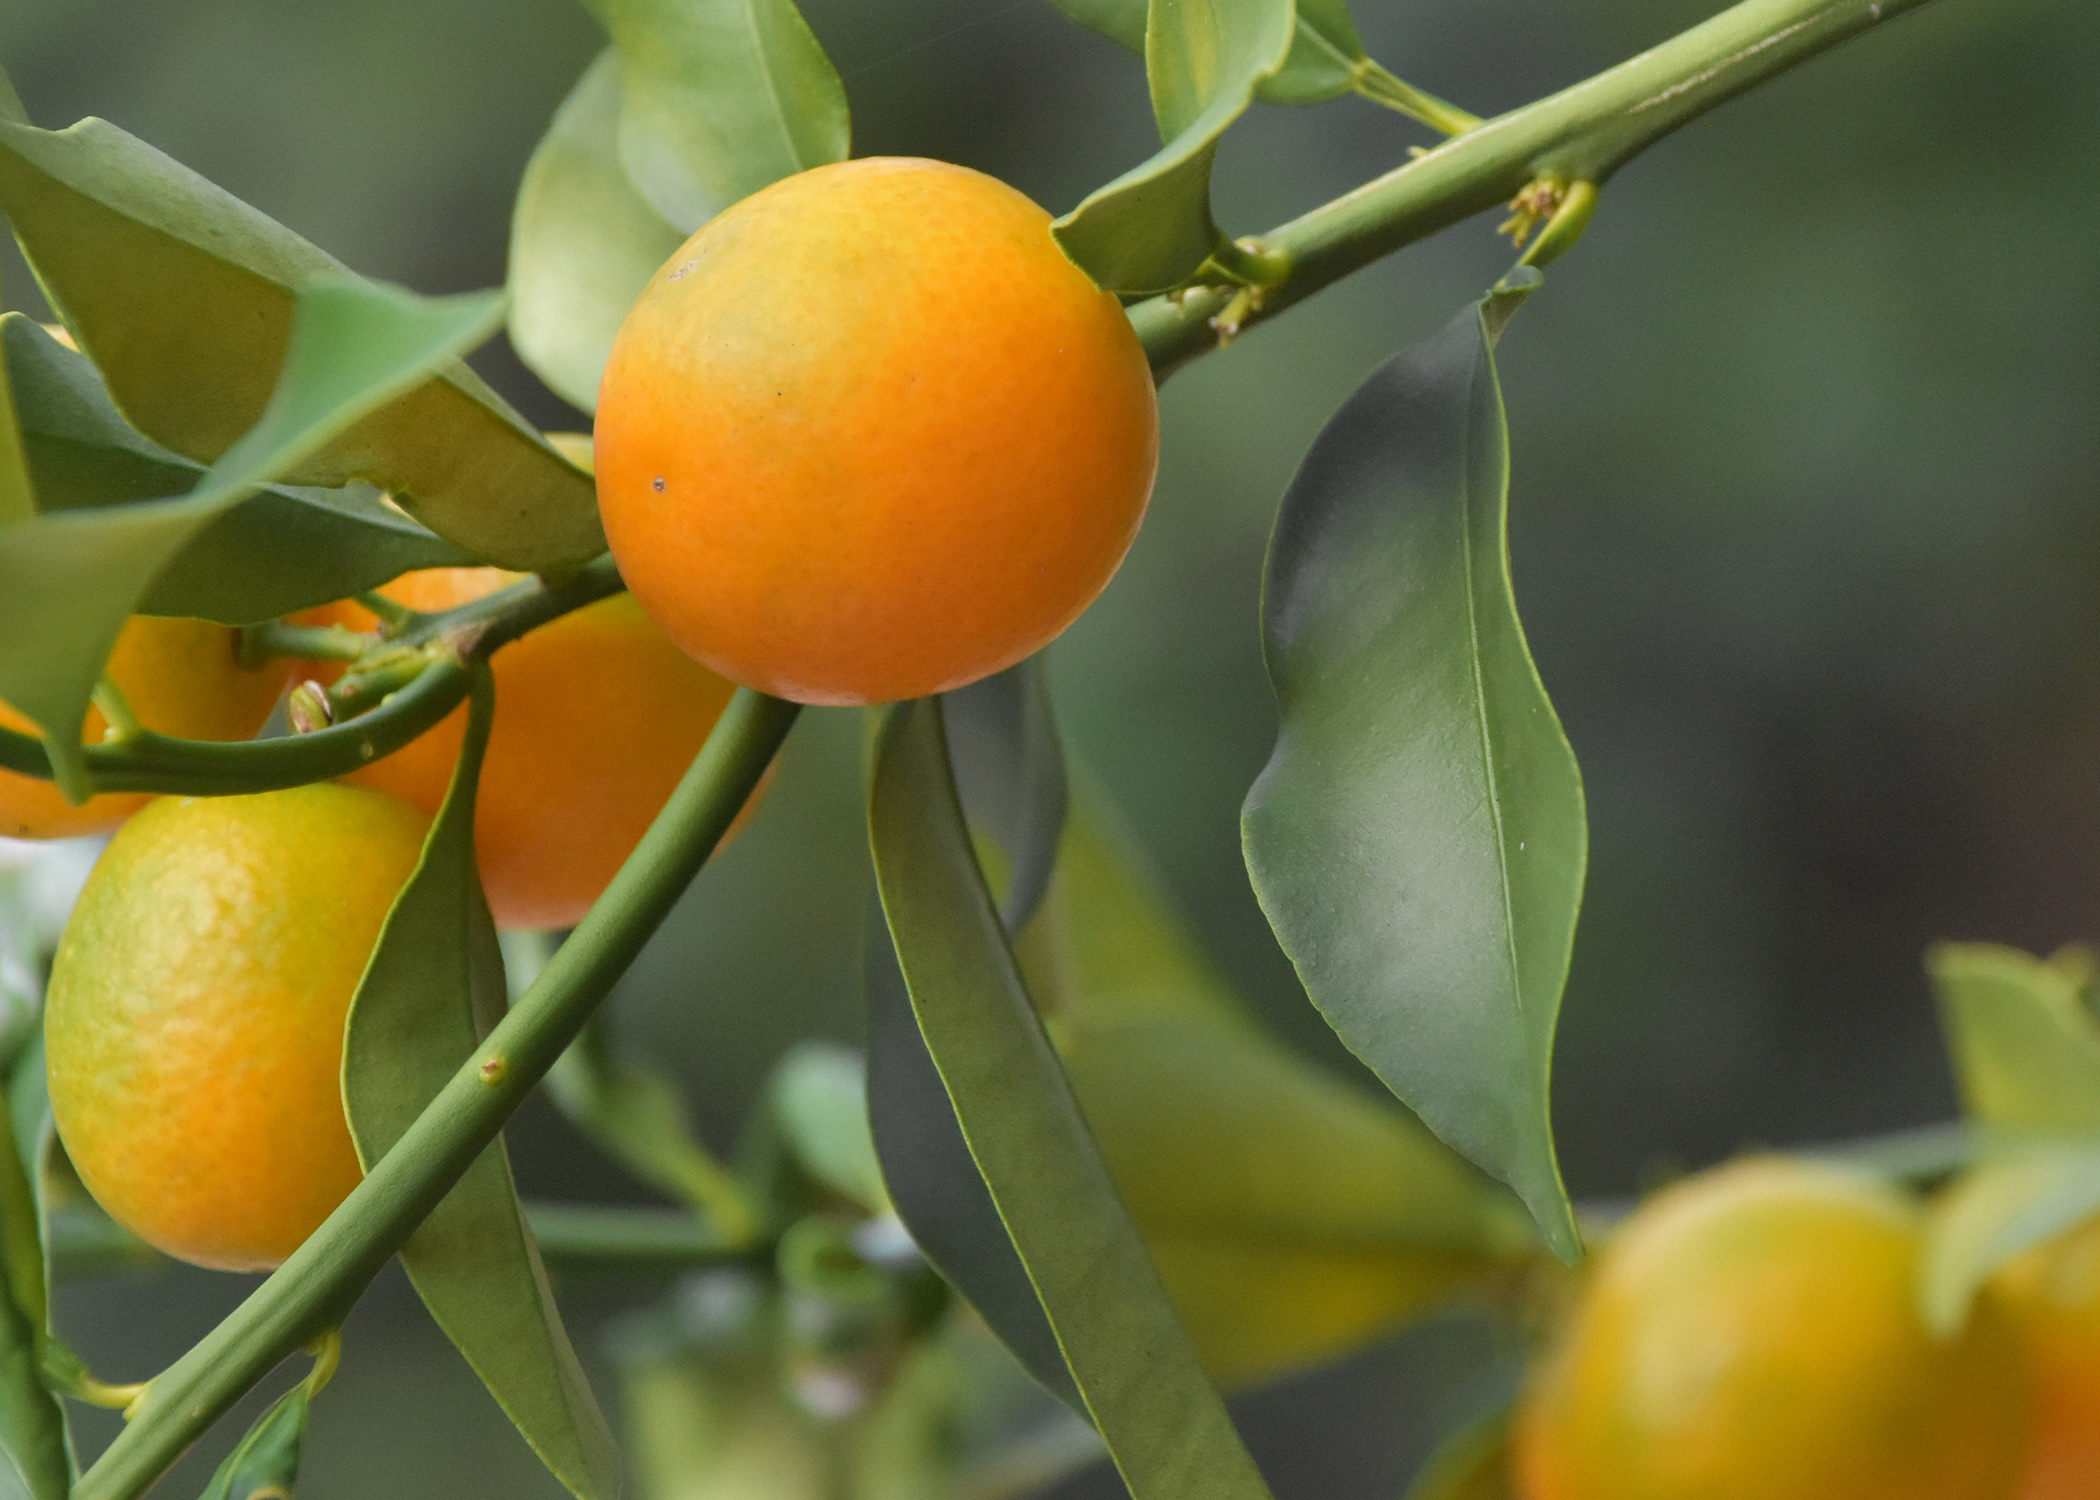 Kumquats produce fruit in astonishing numbers, but due to their small size, their weight does not threaten even small trees. They are perhaps the most cold tolerant of the citruses. (Photo by MSU Extension/Gary Bachman)